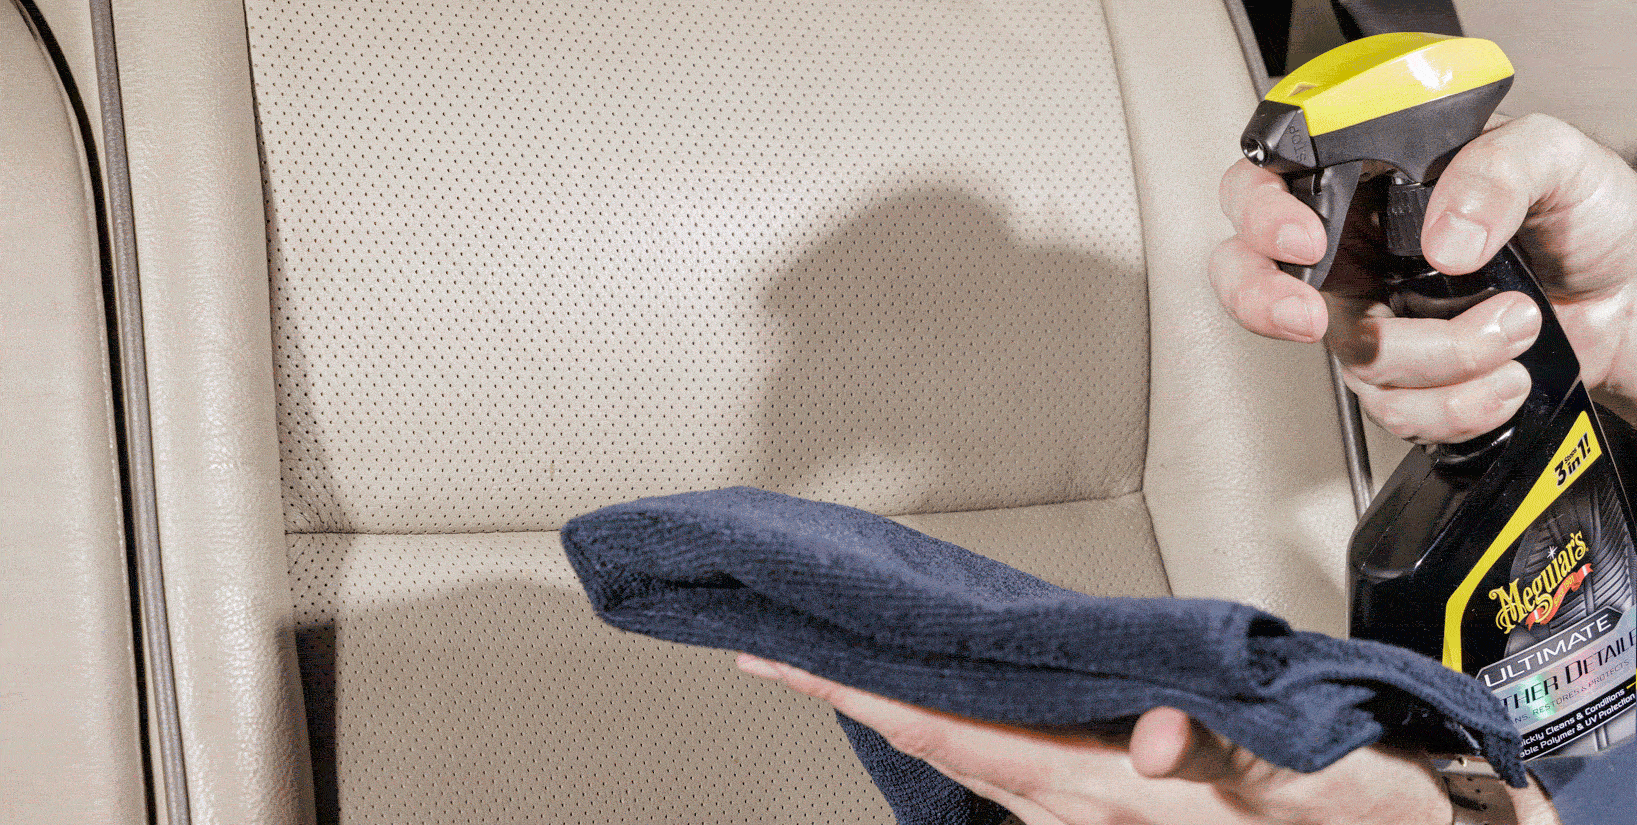 We Tested 10 of the Top Leather Cleaners to Find the Best